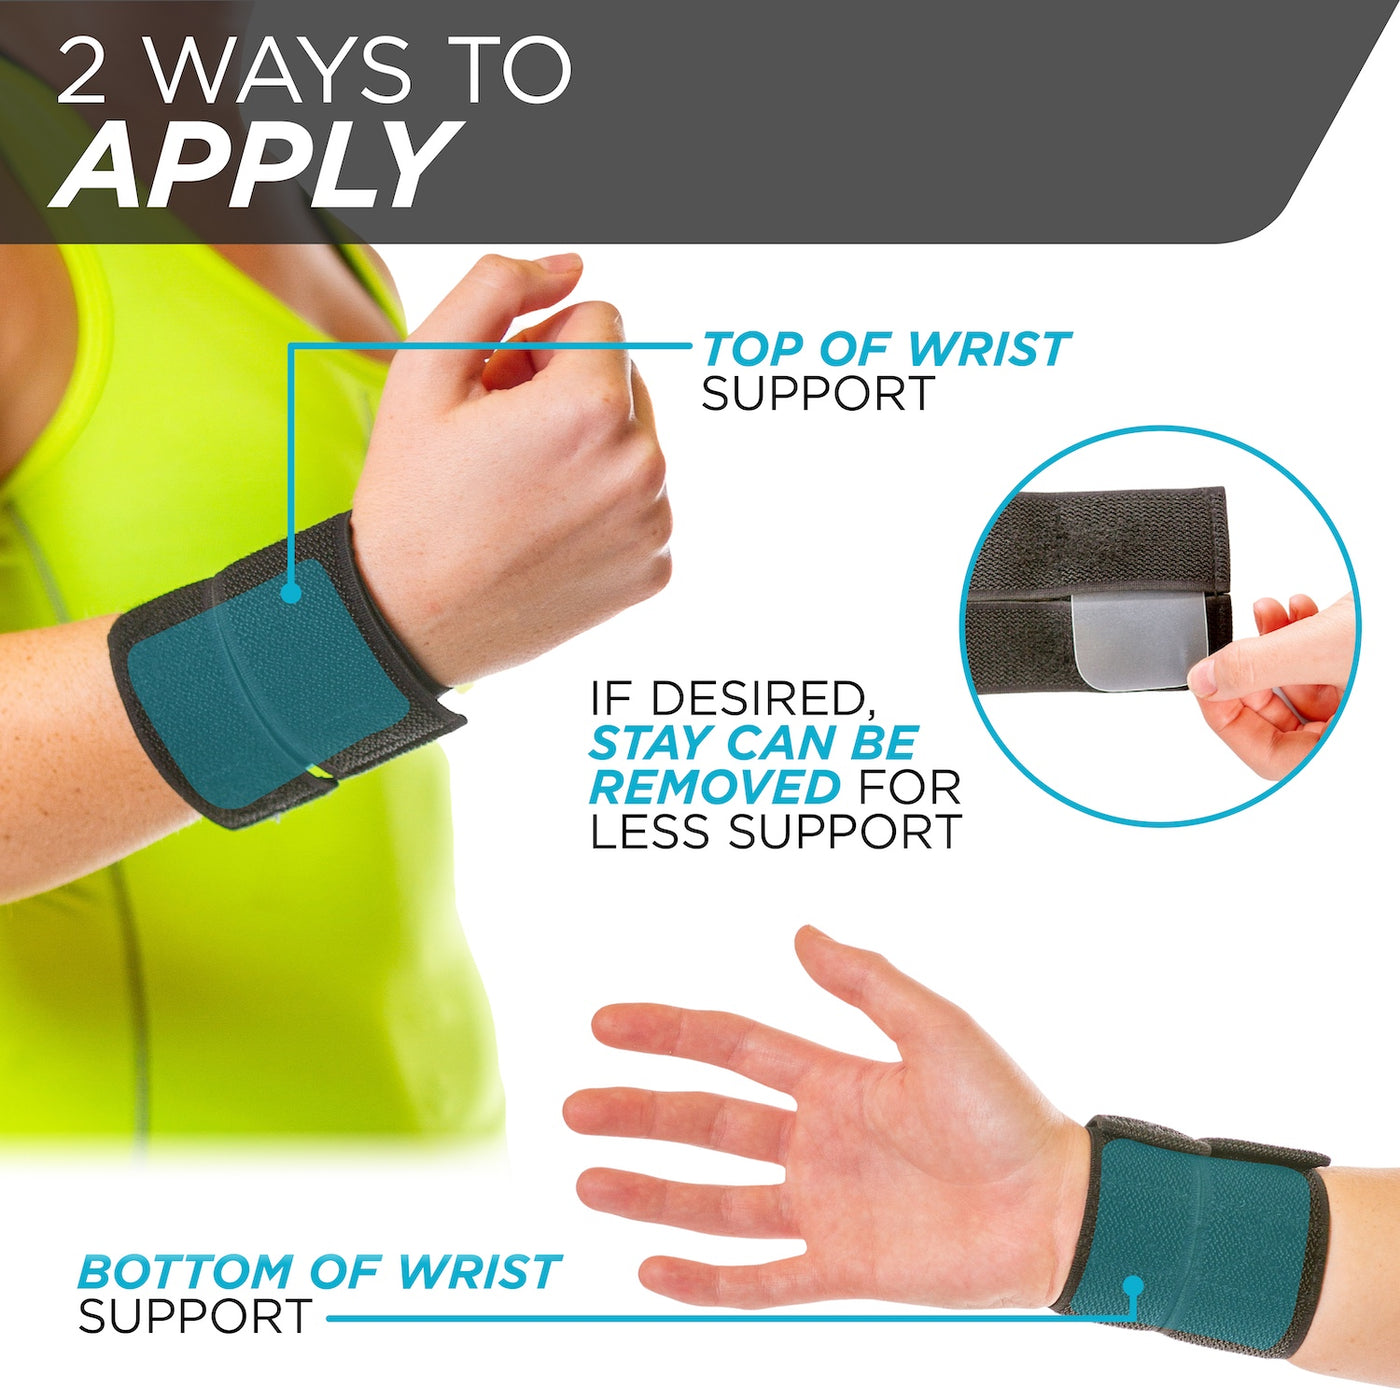 The sports wrist brace can be adjusted to have the removable stay on top of the wrist or on the palm side for support